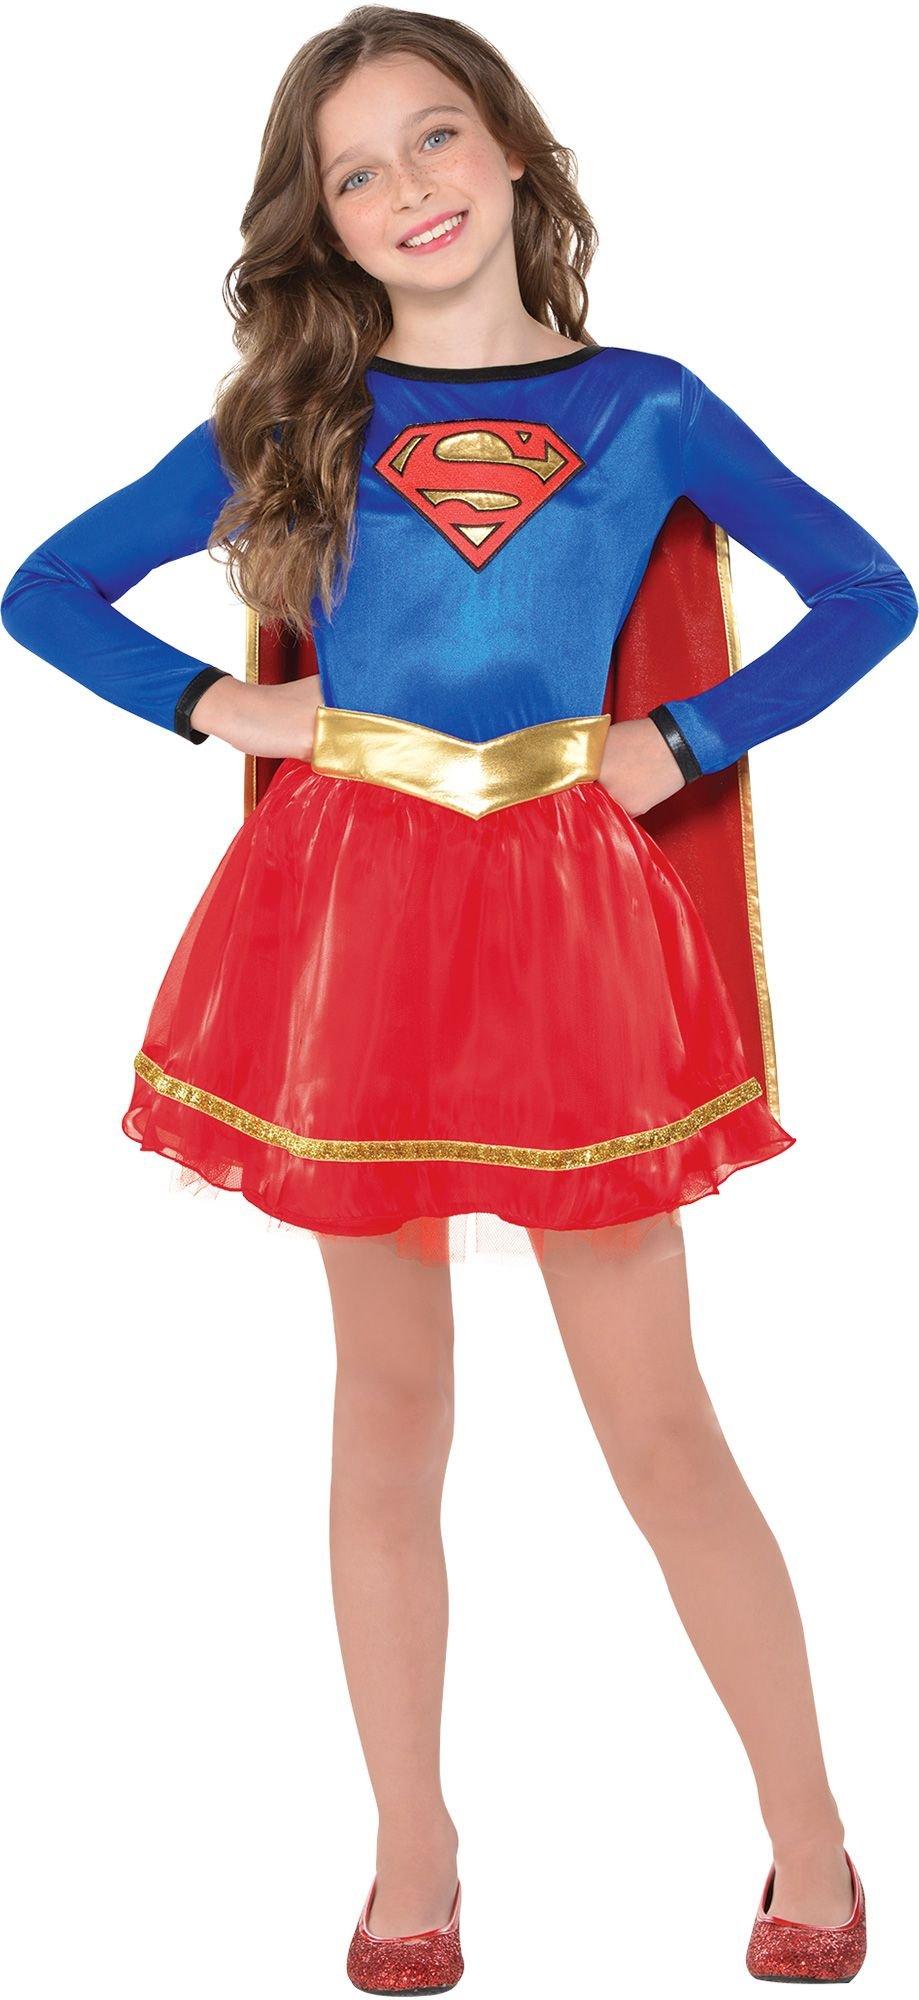 Kids' Supergirl Costume | Party City